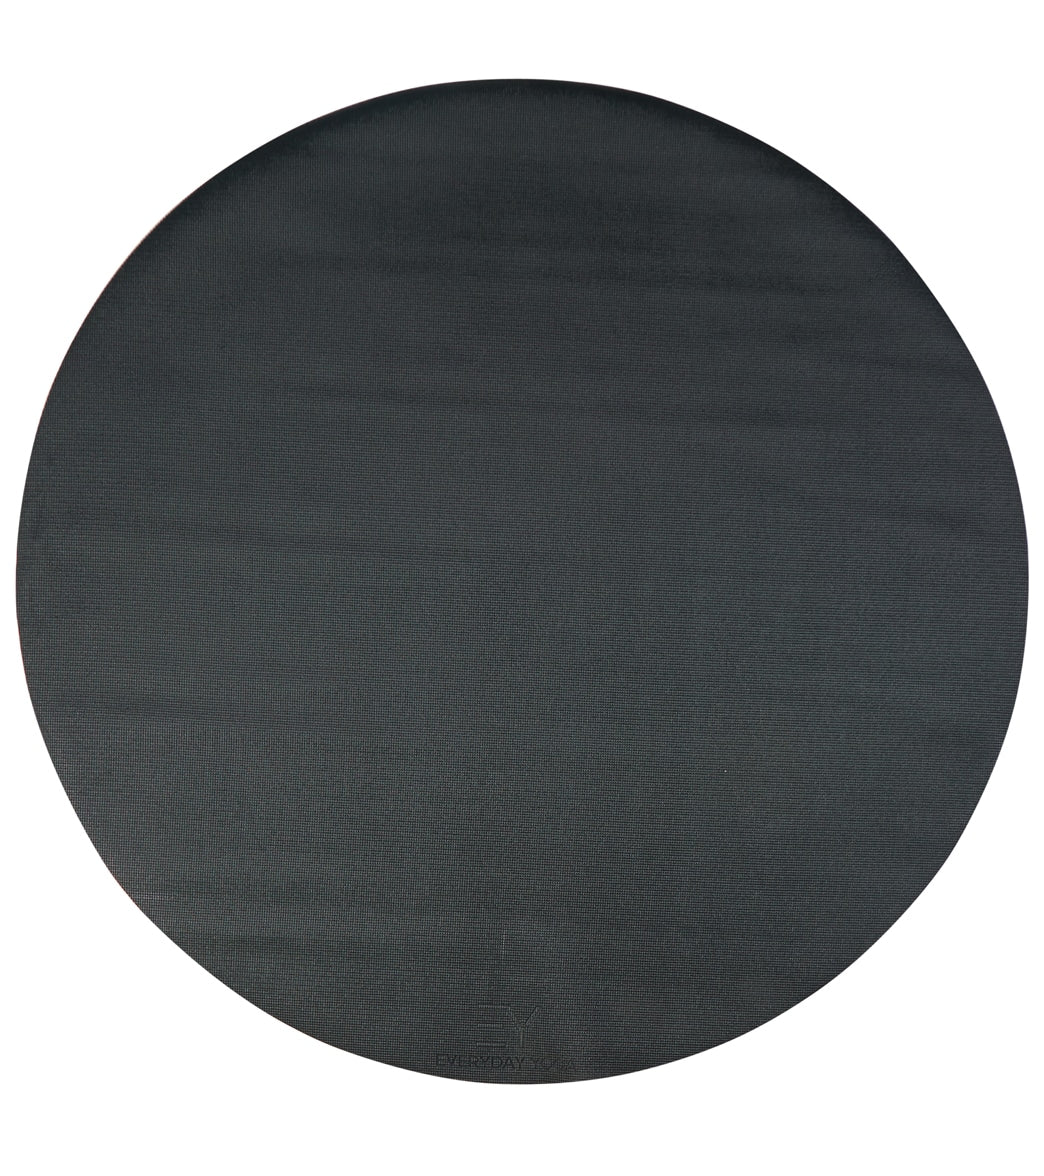 SCHRINER Pro Large Round Yoga Mat 6' x 8mm for Exercise